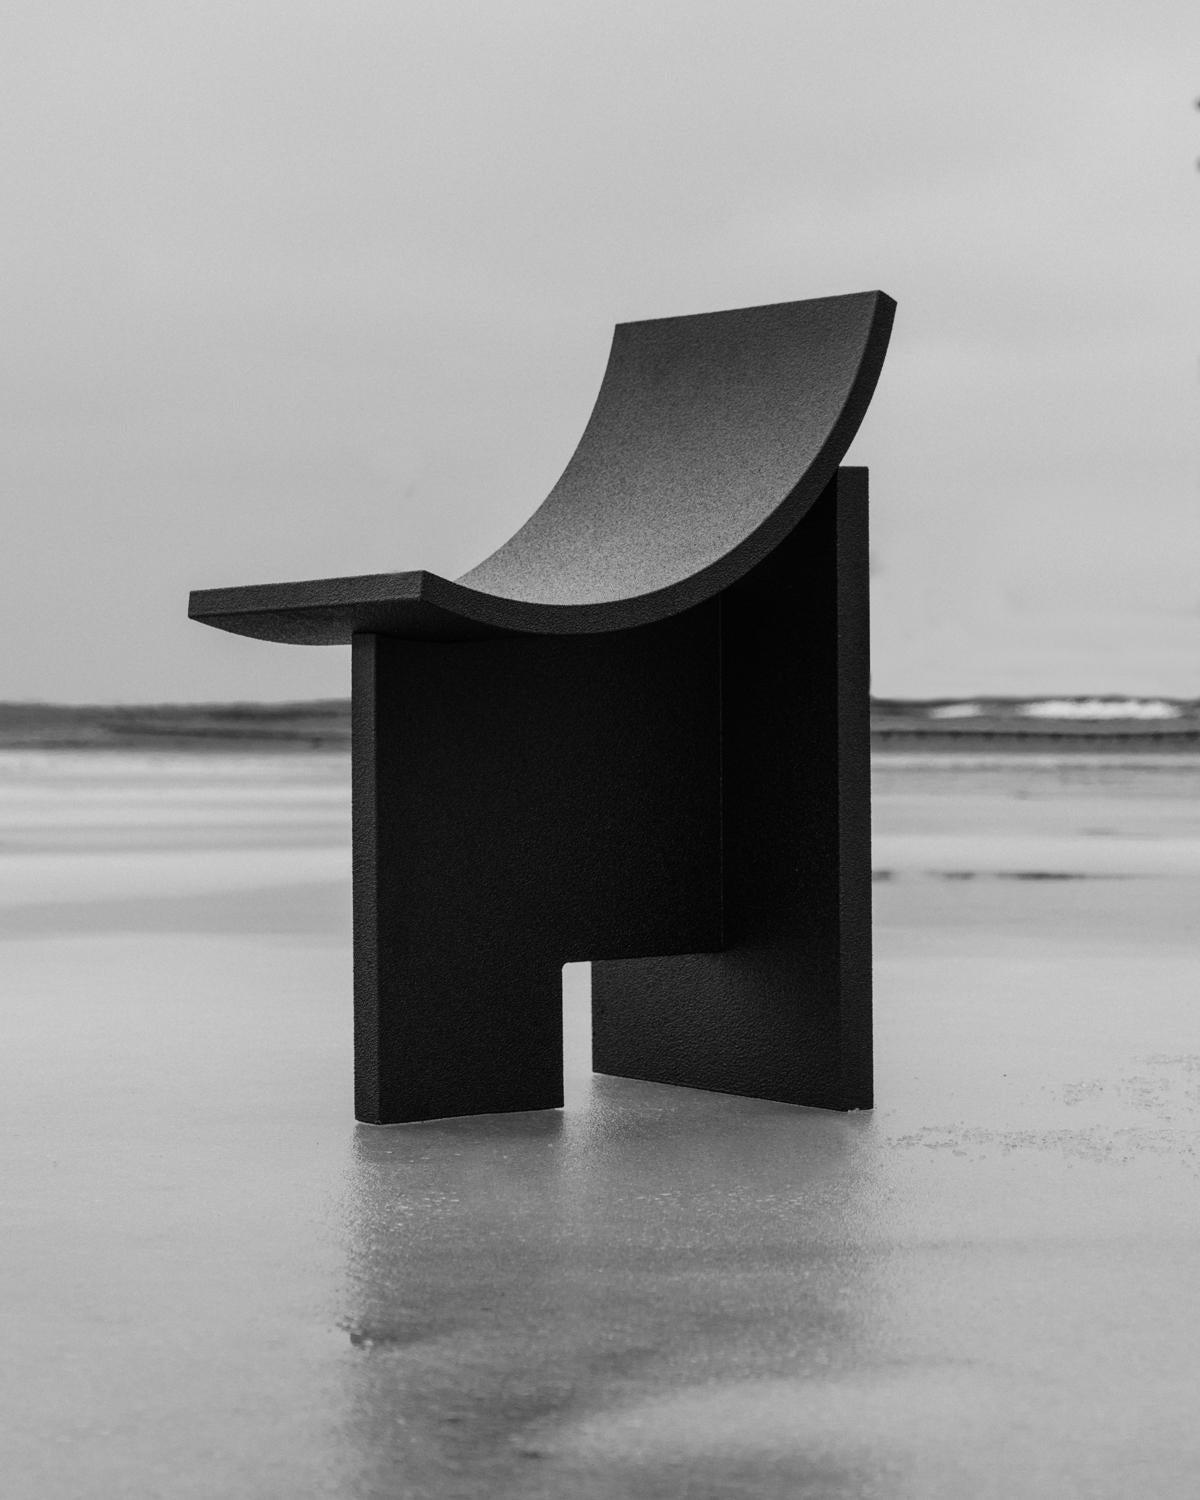 The “JD01 Noir” began as a case study in reductivism, whose epilogue played out to be a single sheet of baltic birched plywood, manipulated into this simplistically congruent chair. Thermal coating is a process that mixes a chemical and catalyst,